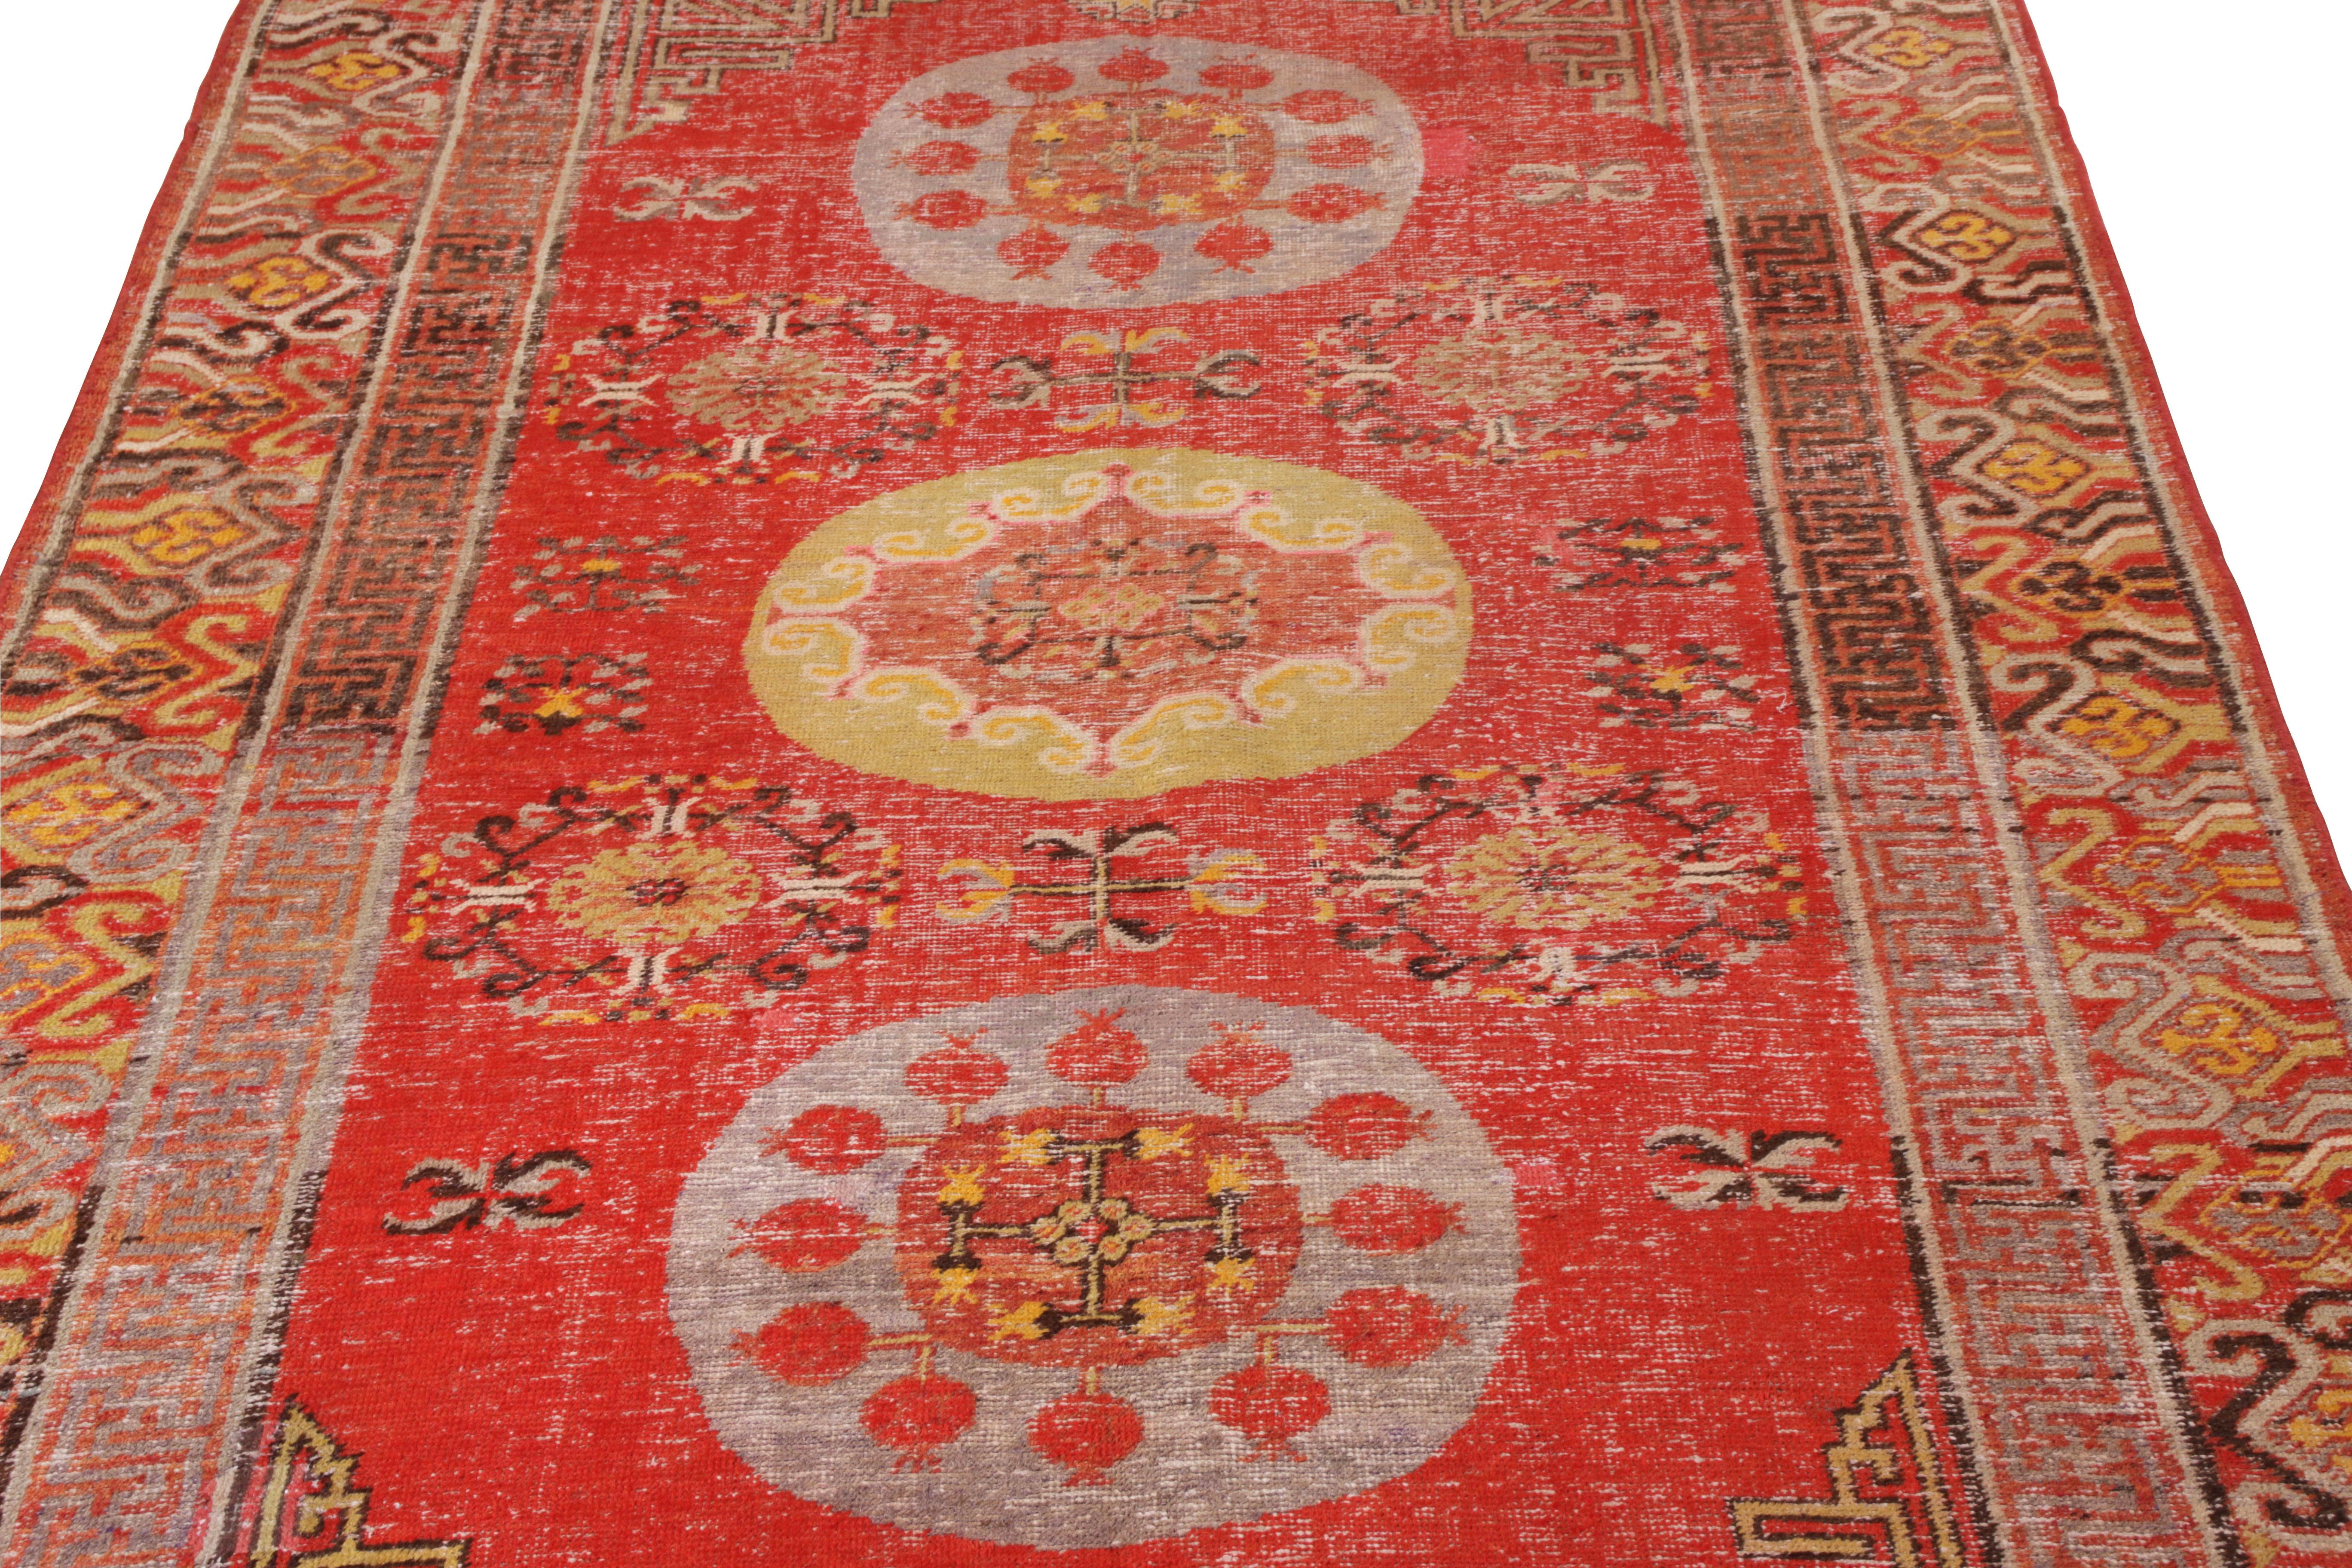 East Turkestani Hand-Knotted Antique Khotan Rug in Red and Gold with Medallion Patterns